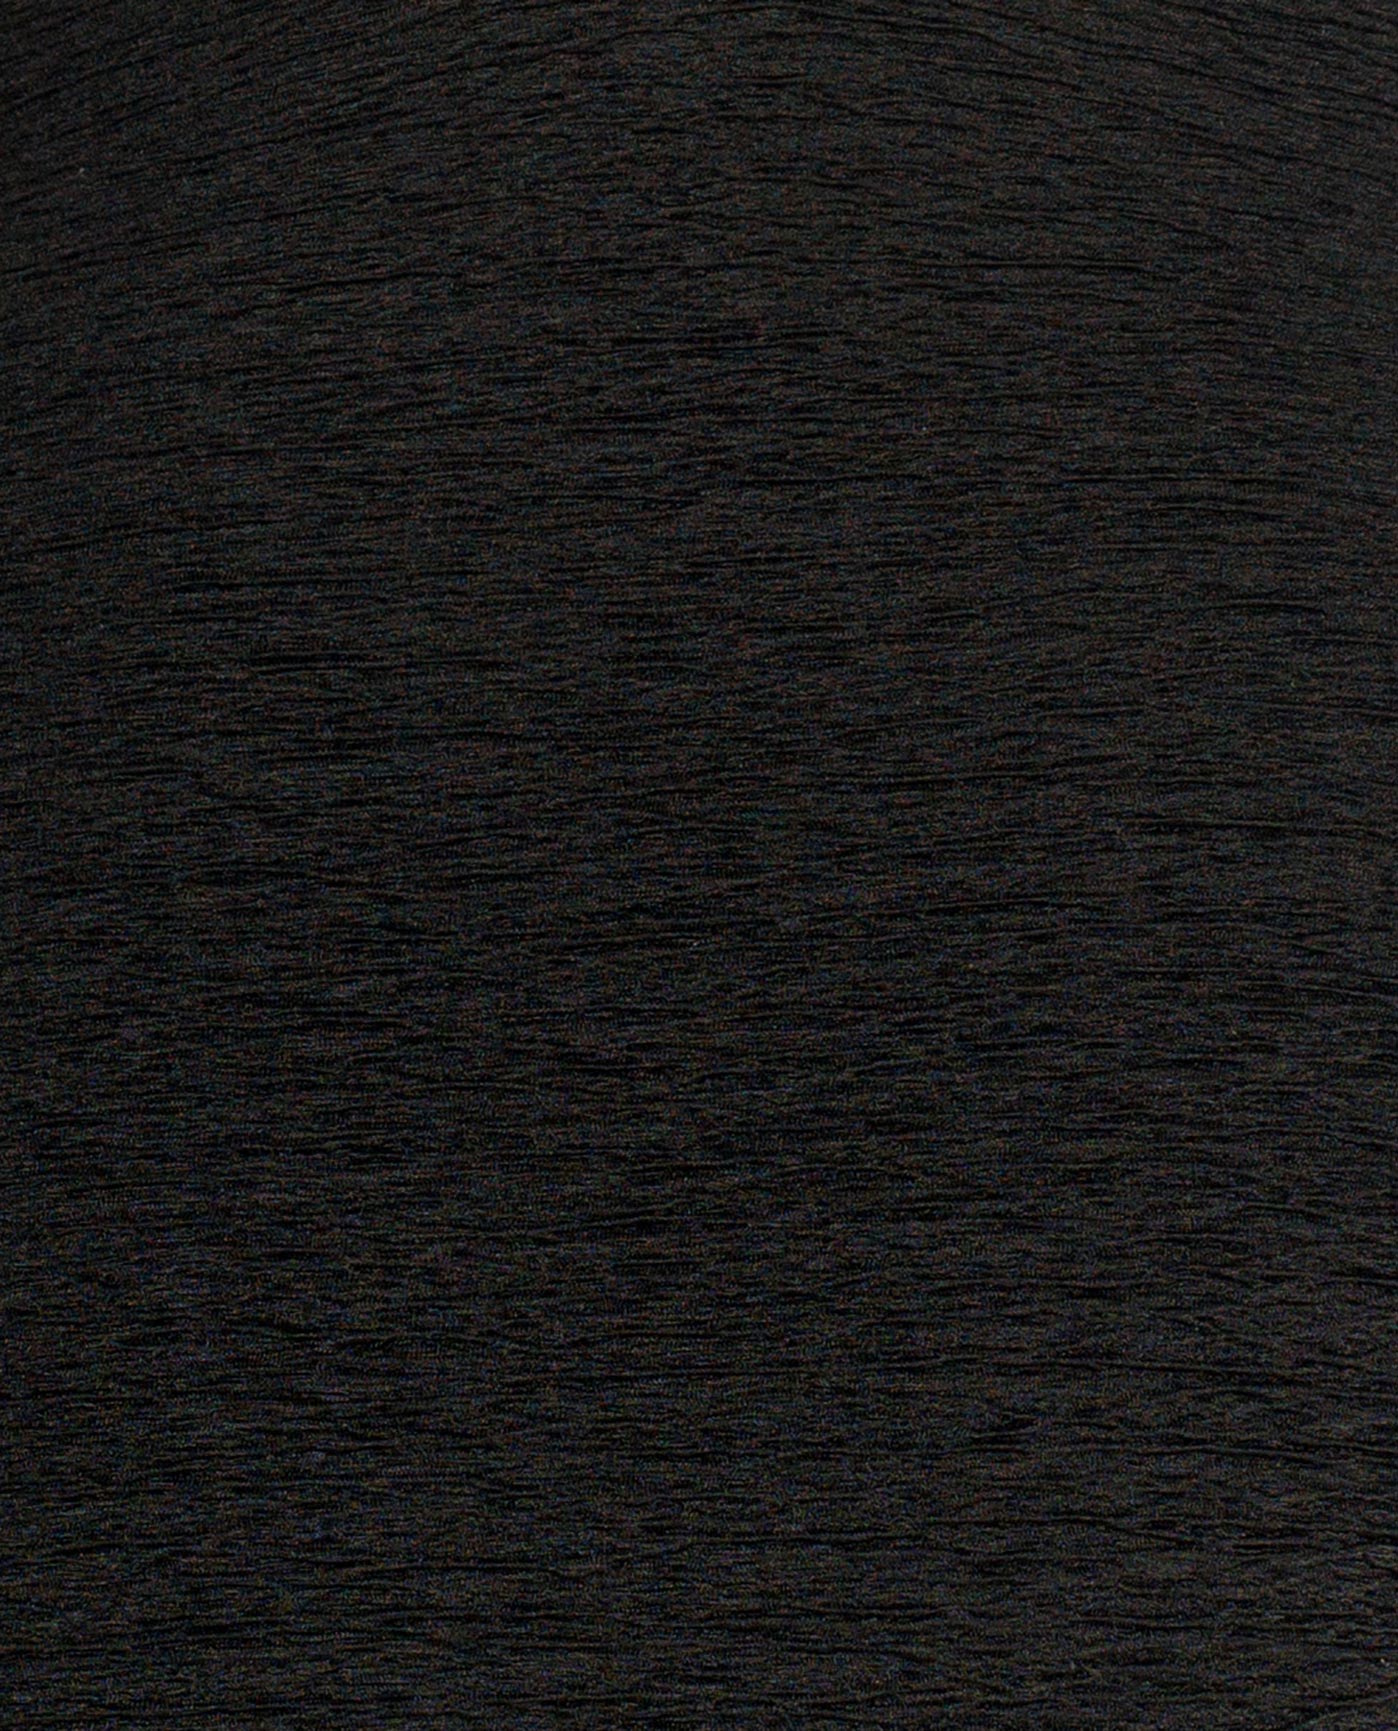 FABRIC SWATCH VIEW OF CHLORINE RESISTANT KRINKLE TEXTURED SOLID TWIST FRONT PLUS SIZE LONG TORSO ONE PIECE | KRINKLE BLACK 2023